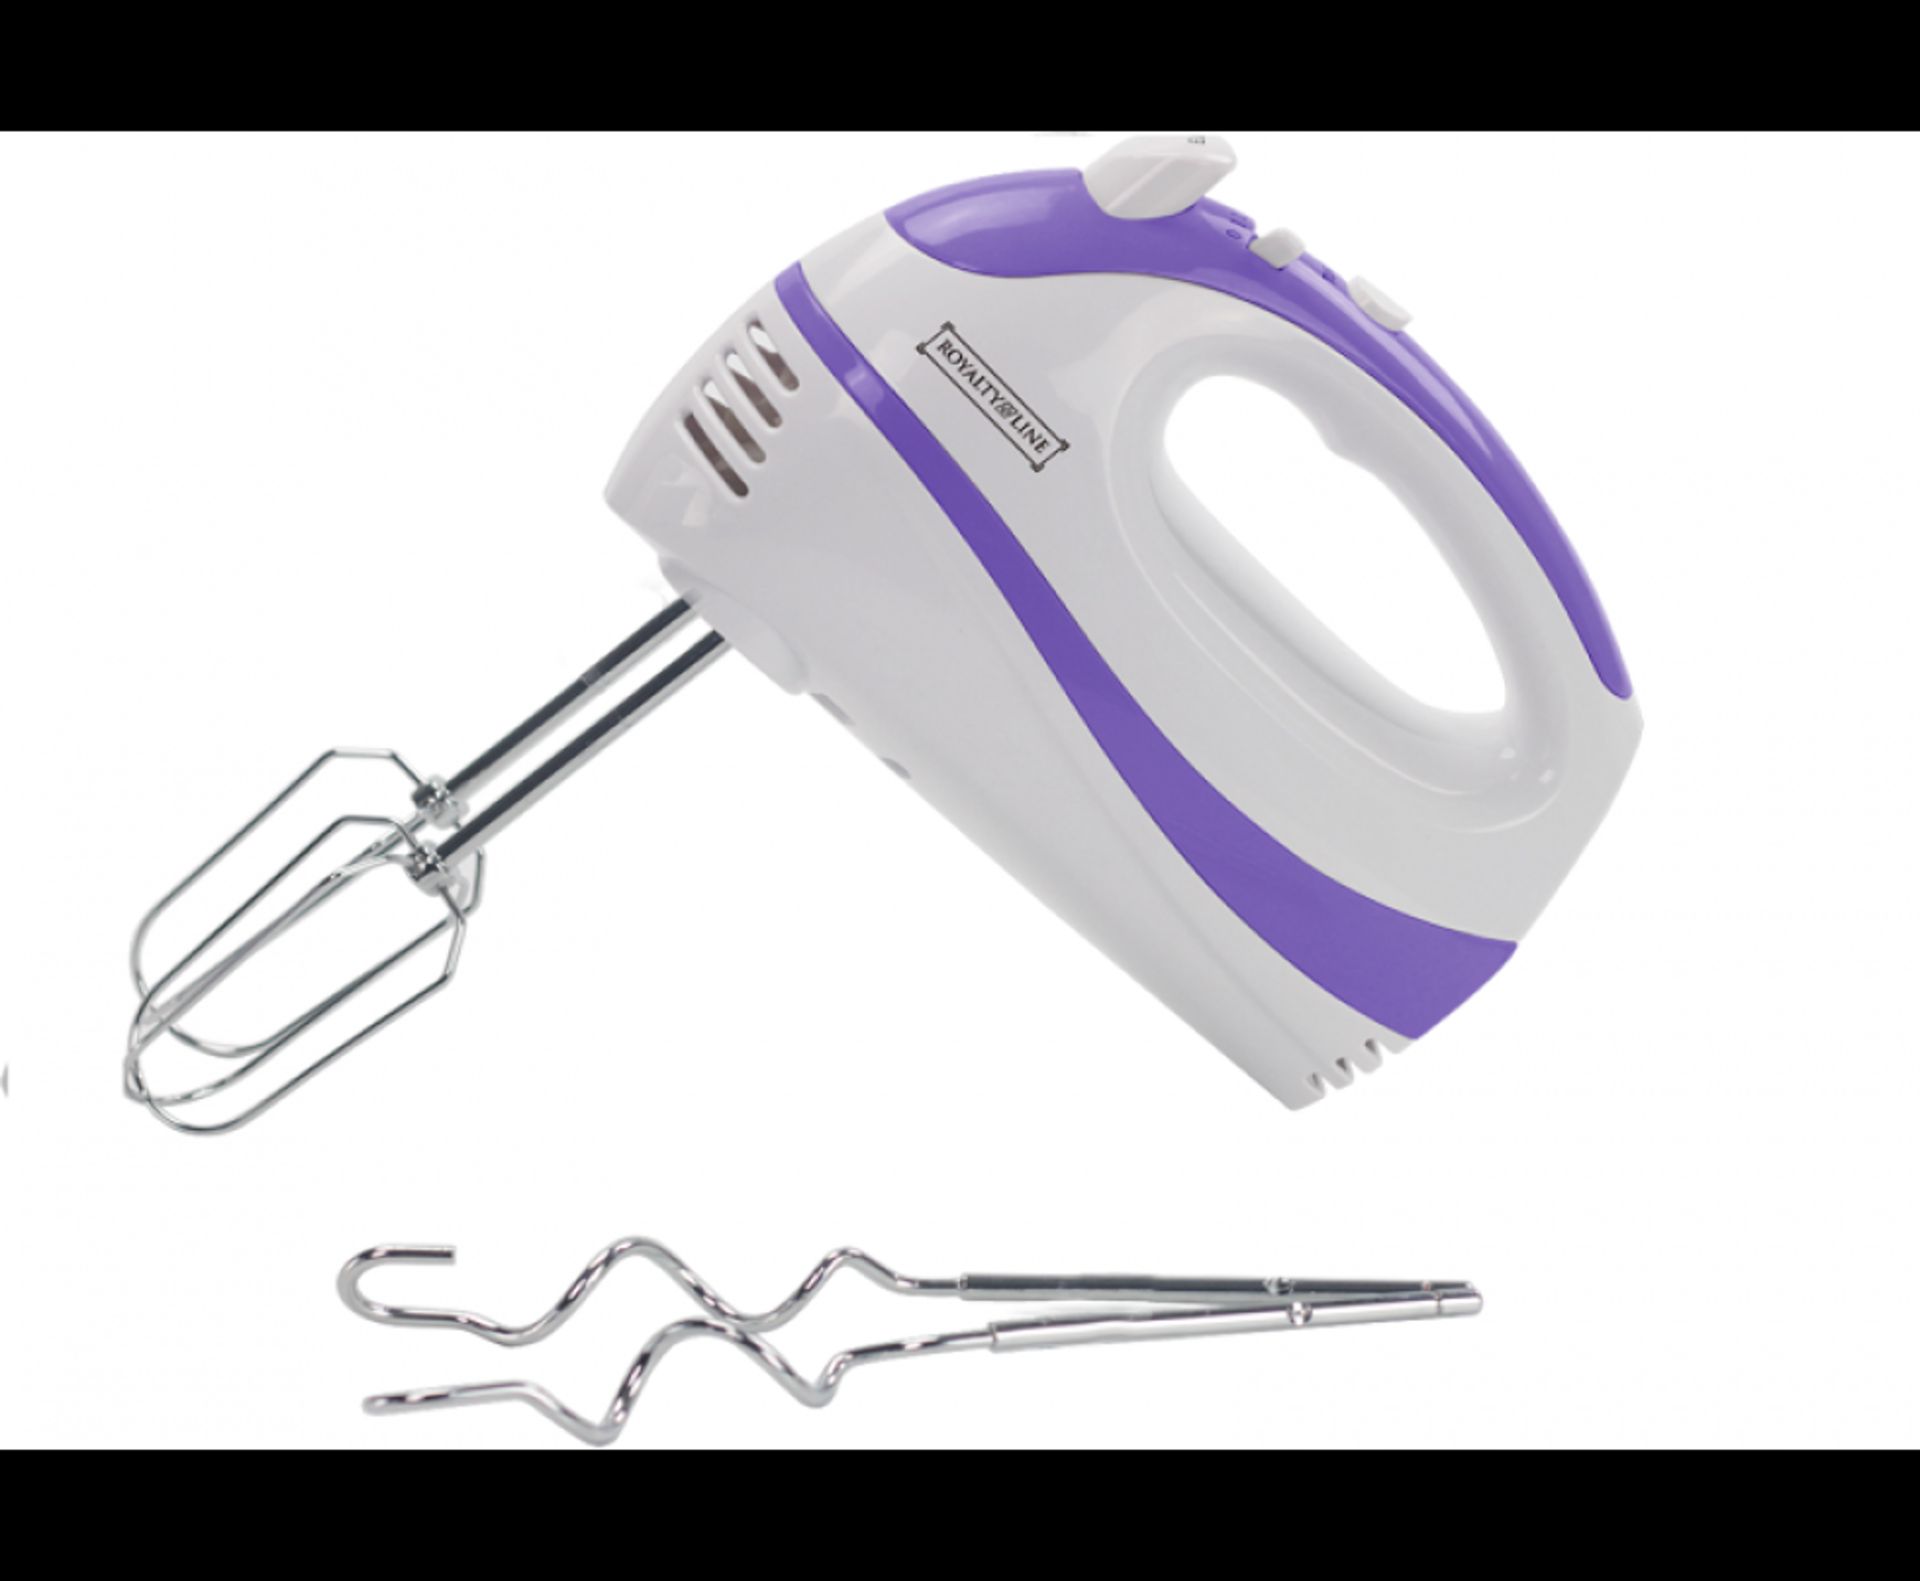 V *TRADE QTY* Brand New Royalty Line 200w Hand Mixer X 4 YOUR BID PRICE TO BE MULTIPLIED BY FOUR